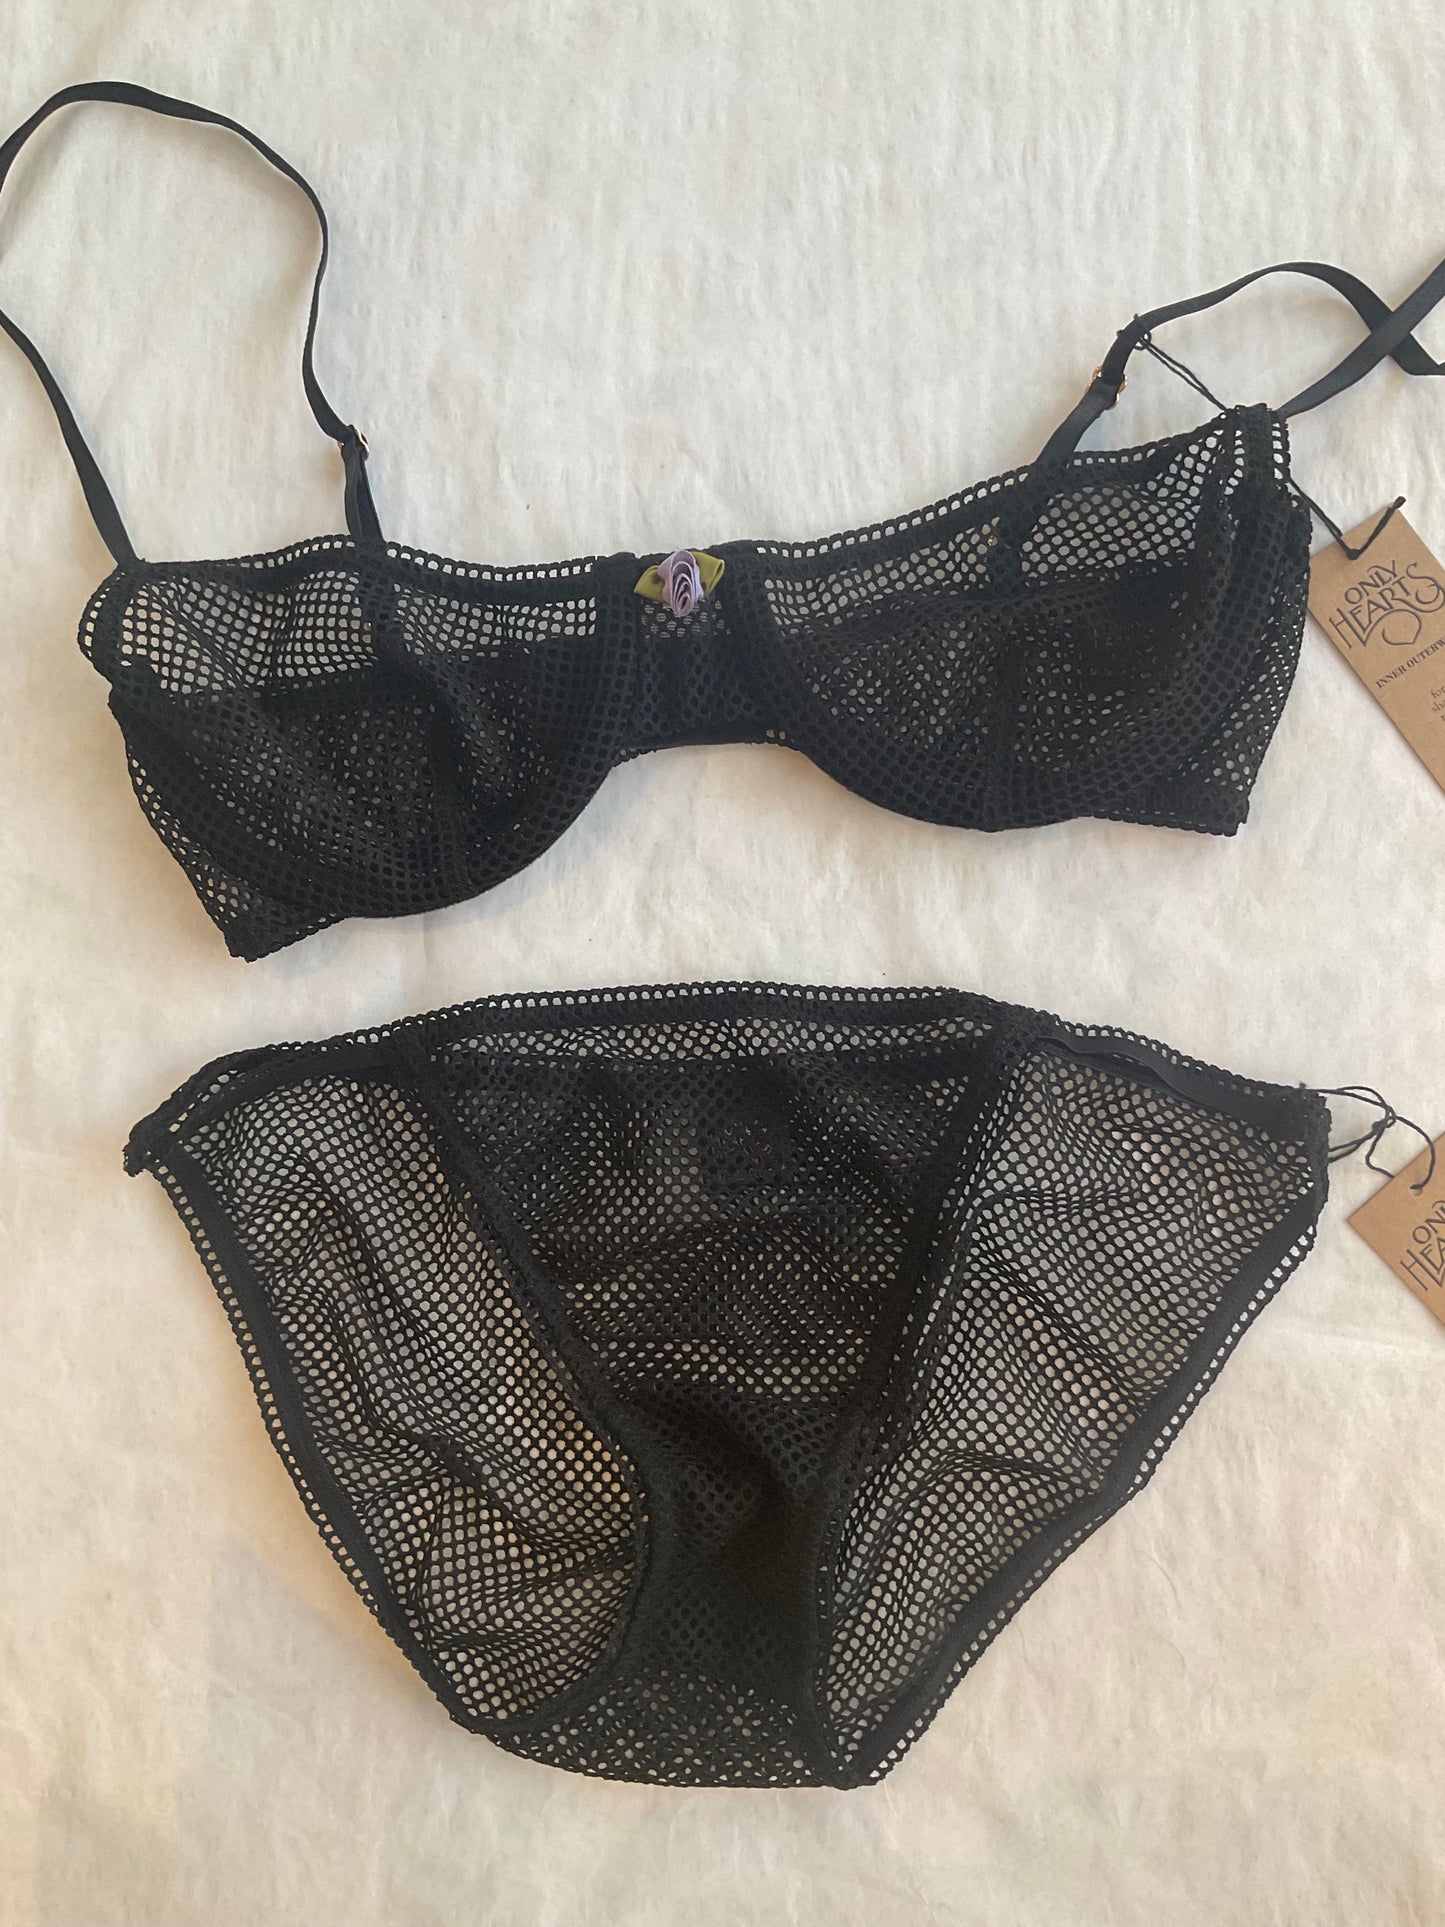 Nothing But Net Underwire Bra in Black By Only Hearts - XS-L